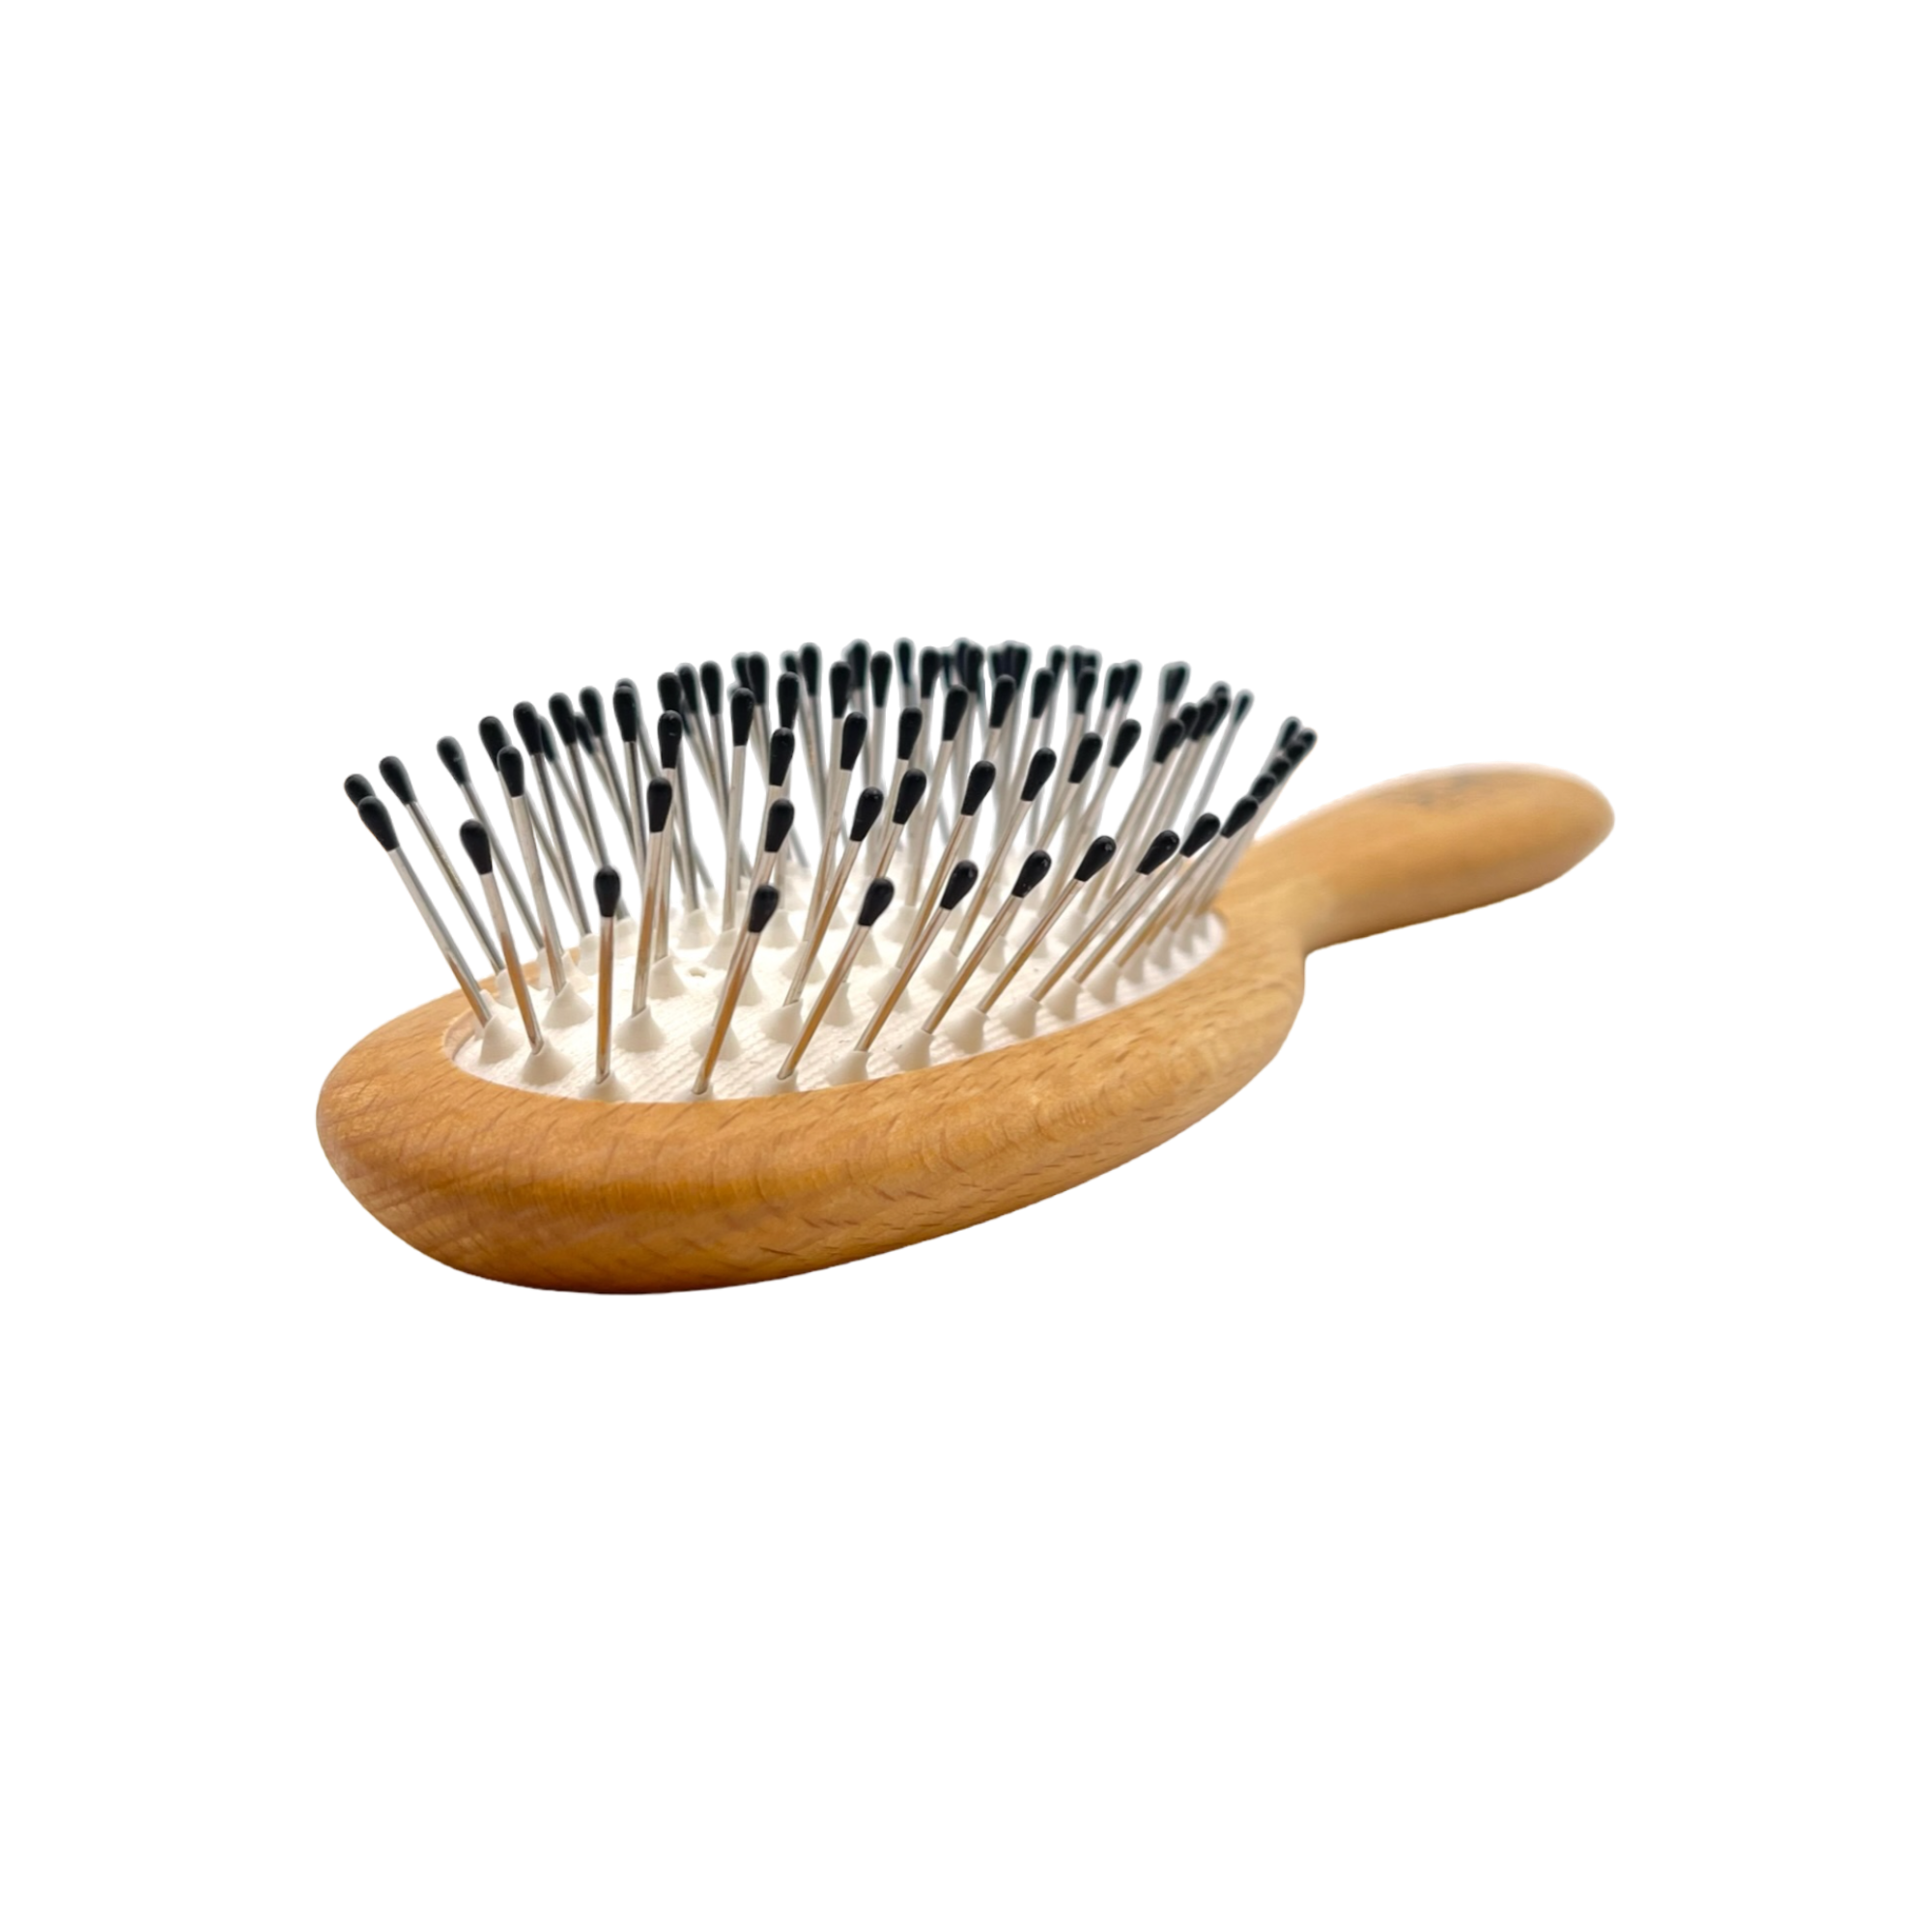 Dural Beech Wood Hair Brush Steel Pins with Ball Tips